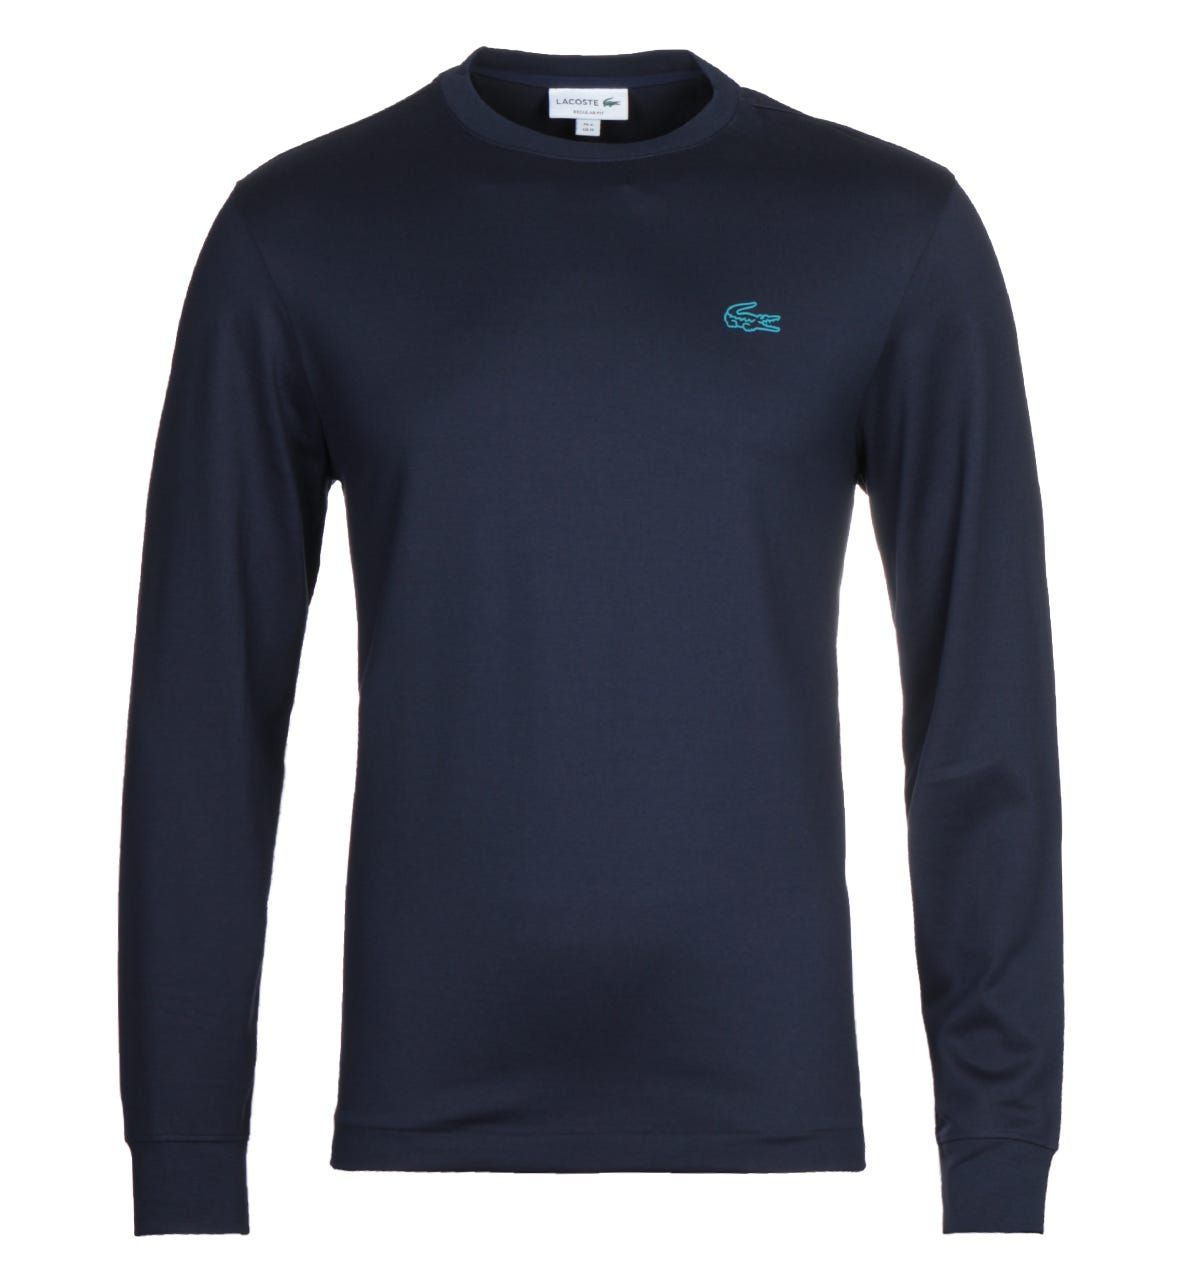 <p>A pure cotton composition, crafted by Lacoste. The Lacoste Homme Navy Long Sleeve T-Shirt is a lightweight garment, fitted with a crew neck and ribbed trims. This iconic design is finished with the Lacoste logo embroidered at the chest.</p><ul><li>Cotton composition</li><li>Crew neck</li><li>Long sleeve</li><li>Ribbed trims</li><li>Lacoste logo embroidered on chest</li></ul><p>Style & Fit:</p><ul><li>Regular fit</li><li>Fits true to size</li></ul><p>Fabric Composition & Care:</p><ul><li>100% Cotton</li><li>Machine washable</li></ul>